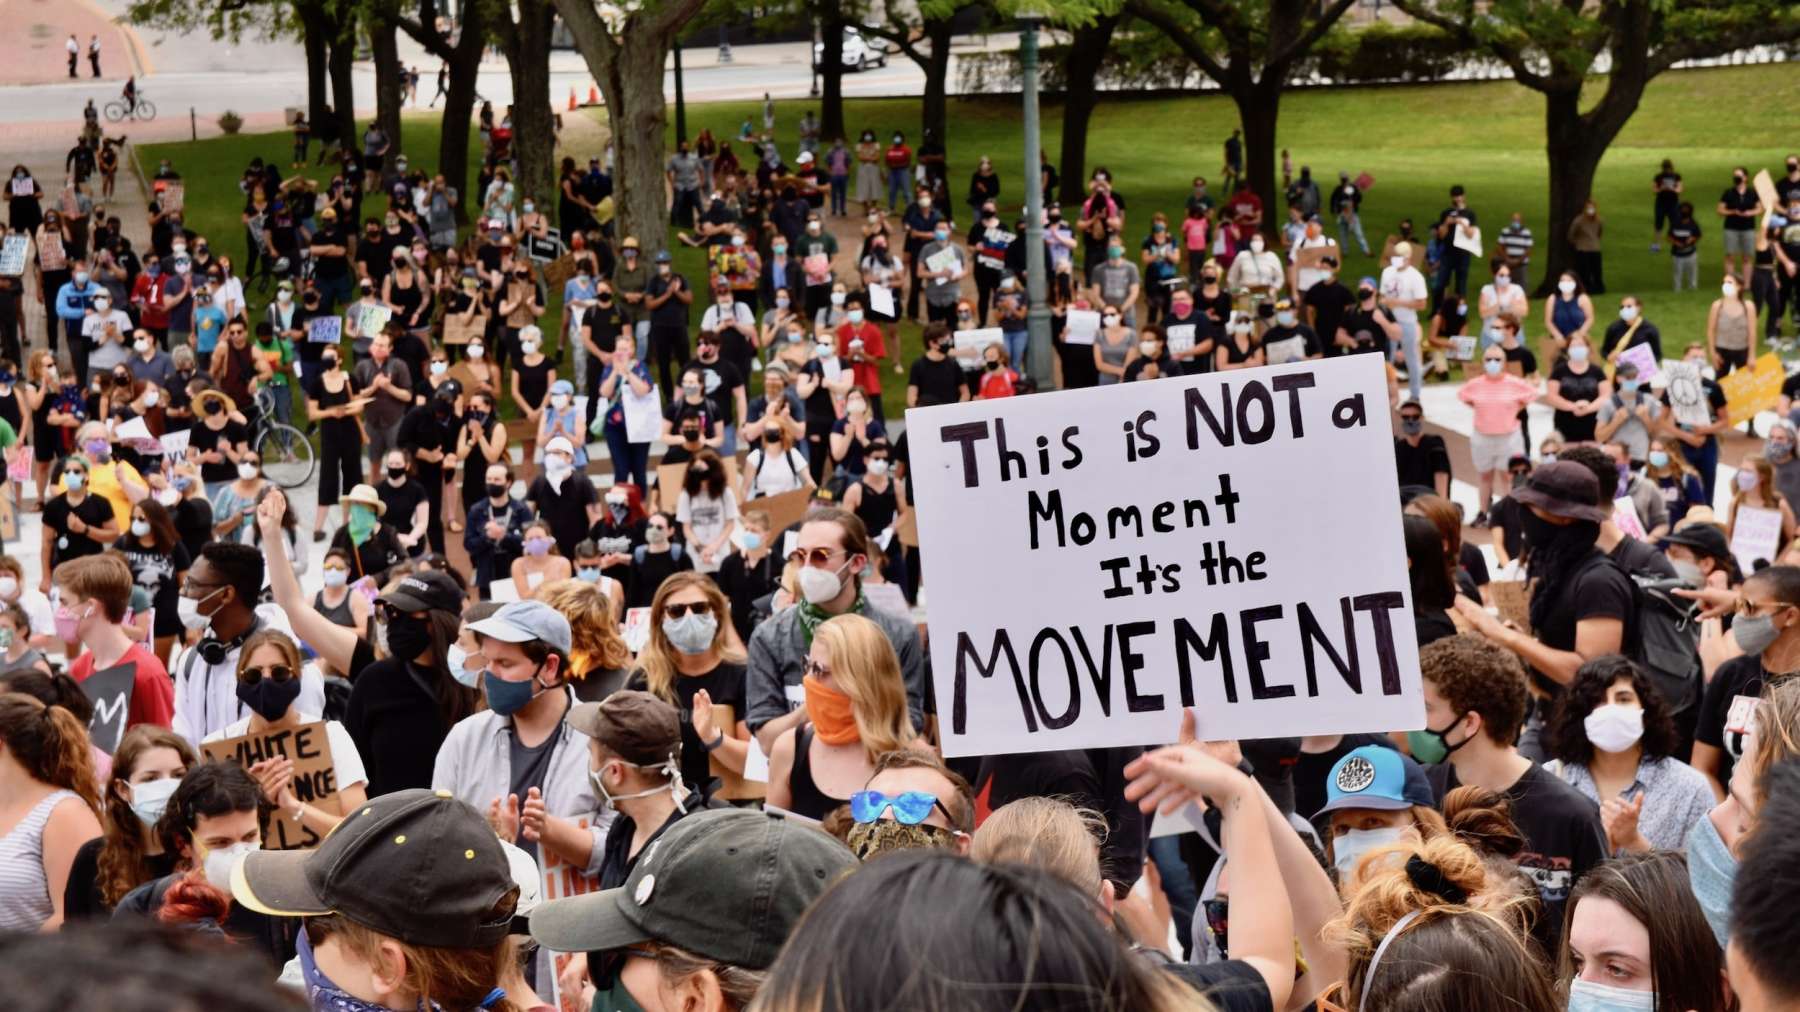 Rhode Island News: The movement for Black Lives in Rhode Island: An overview